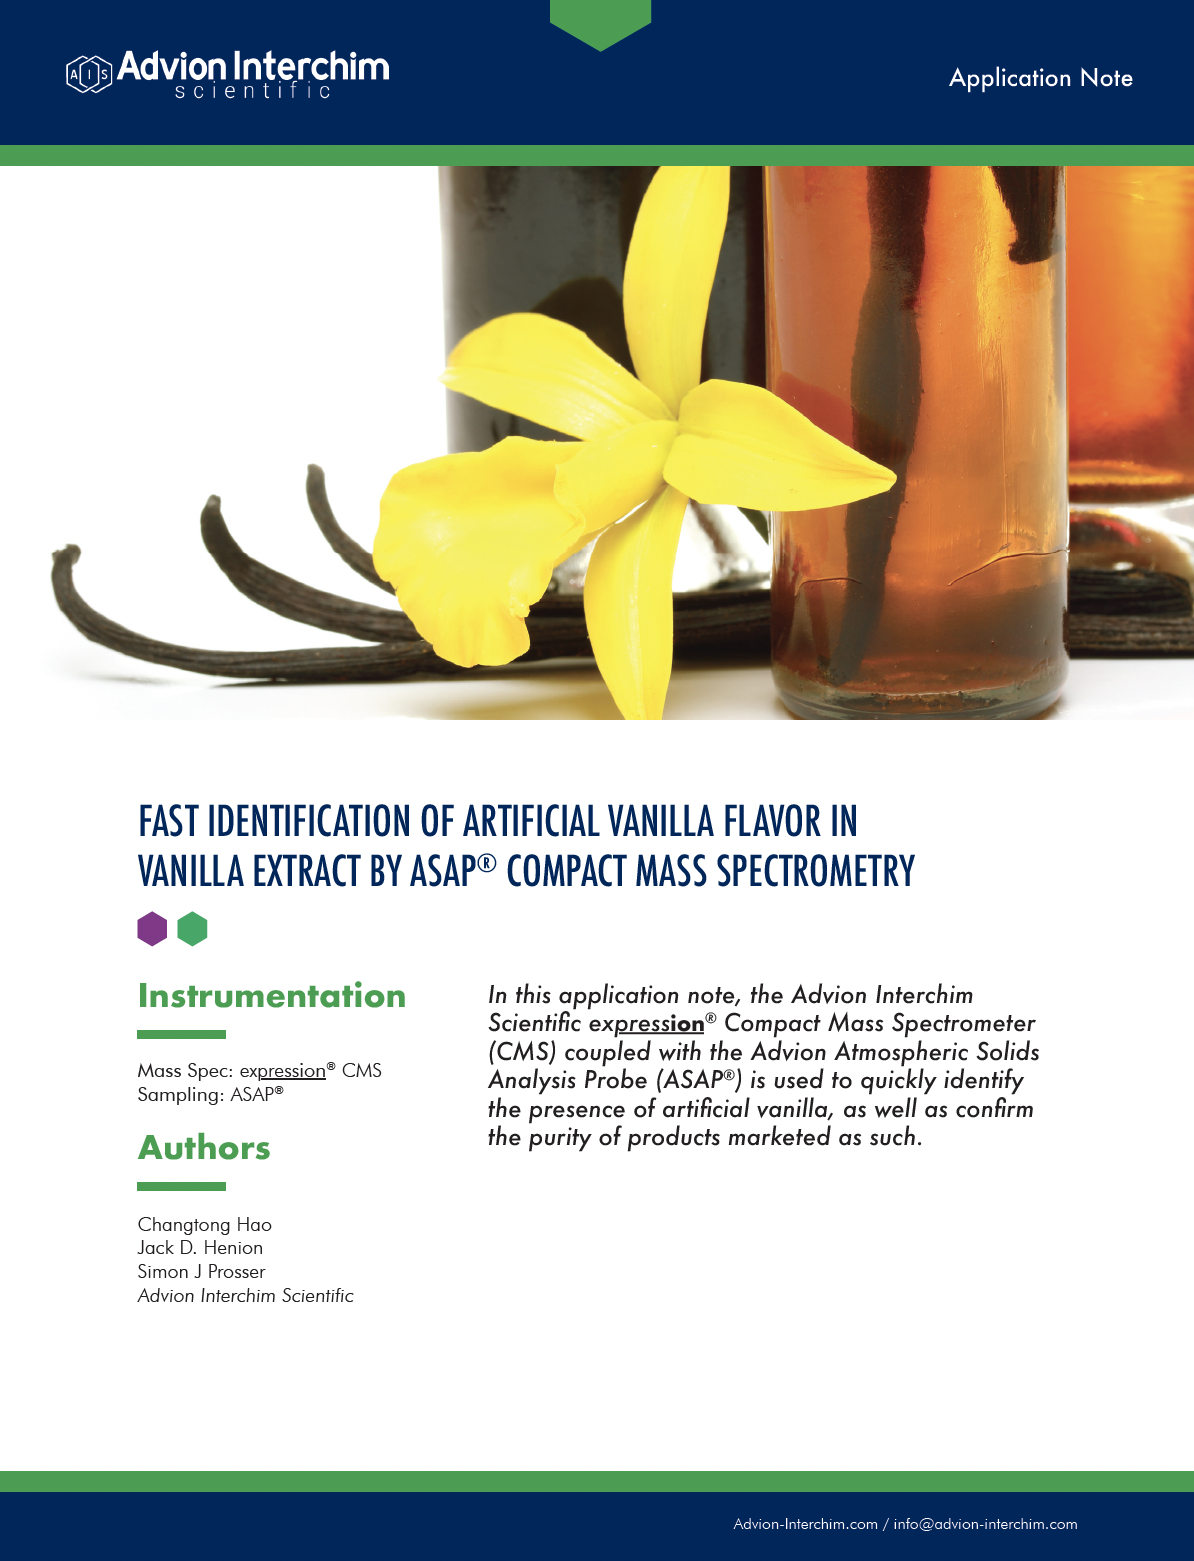 Fast Identification of Artificial Vanilla Flavor in Vanilla Extract by ASAP® Compact Mass Spectrometry